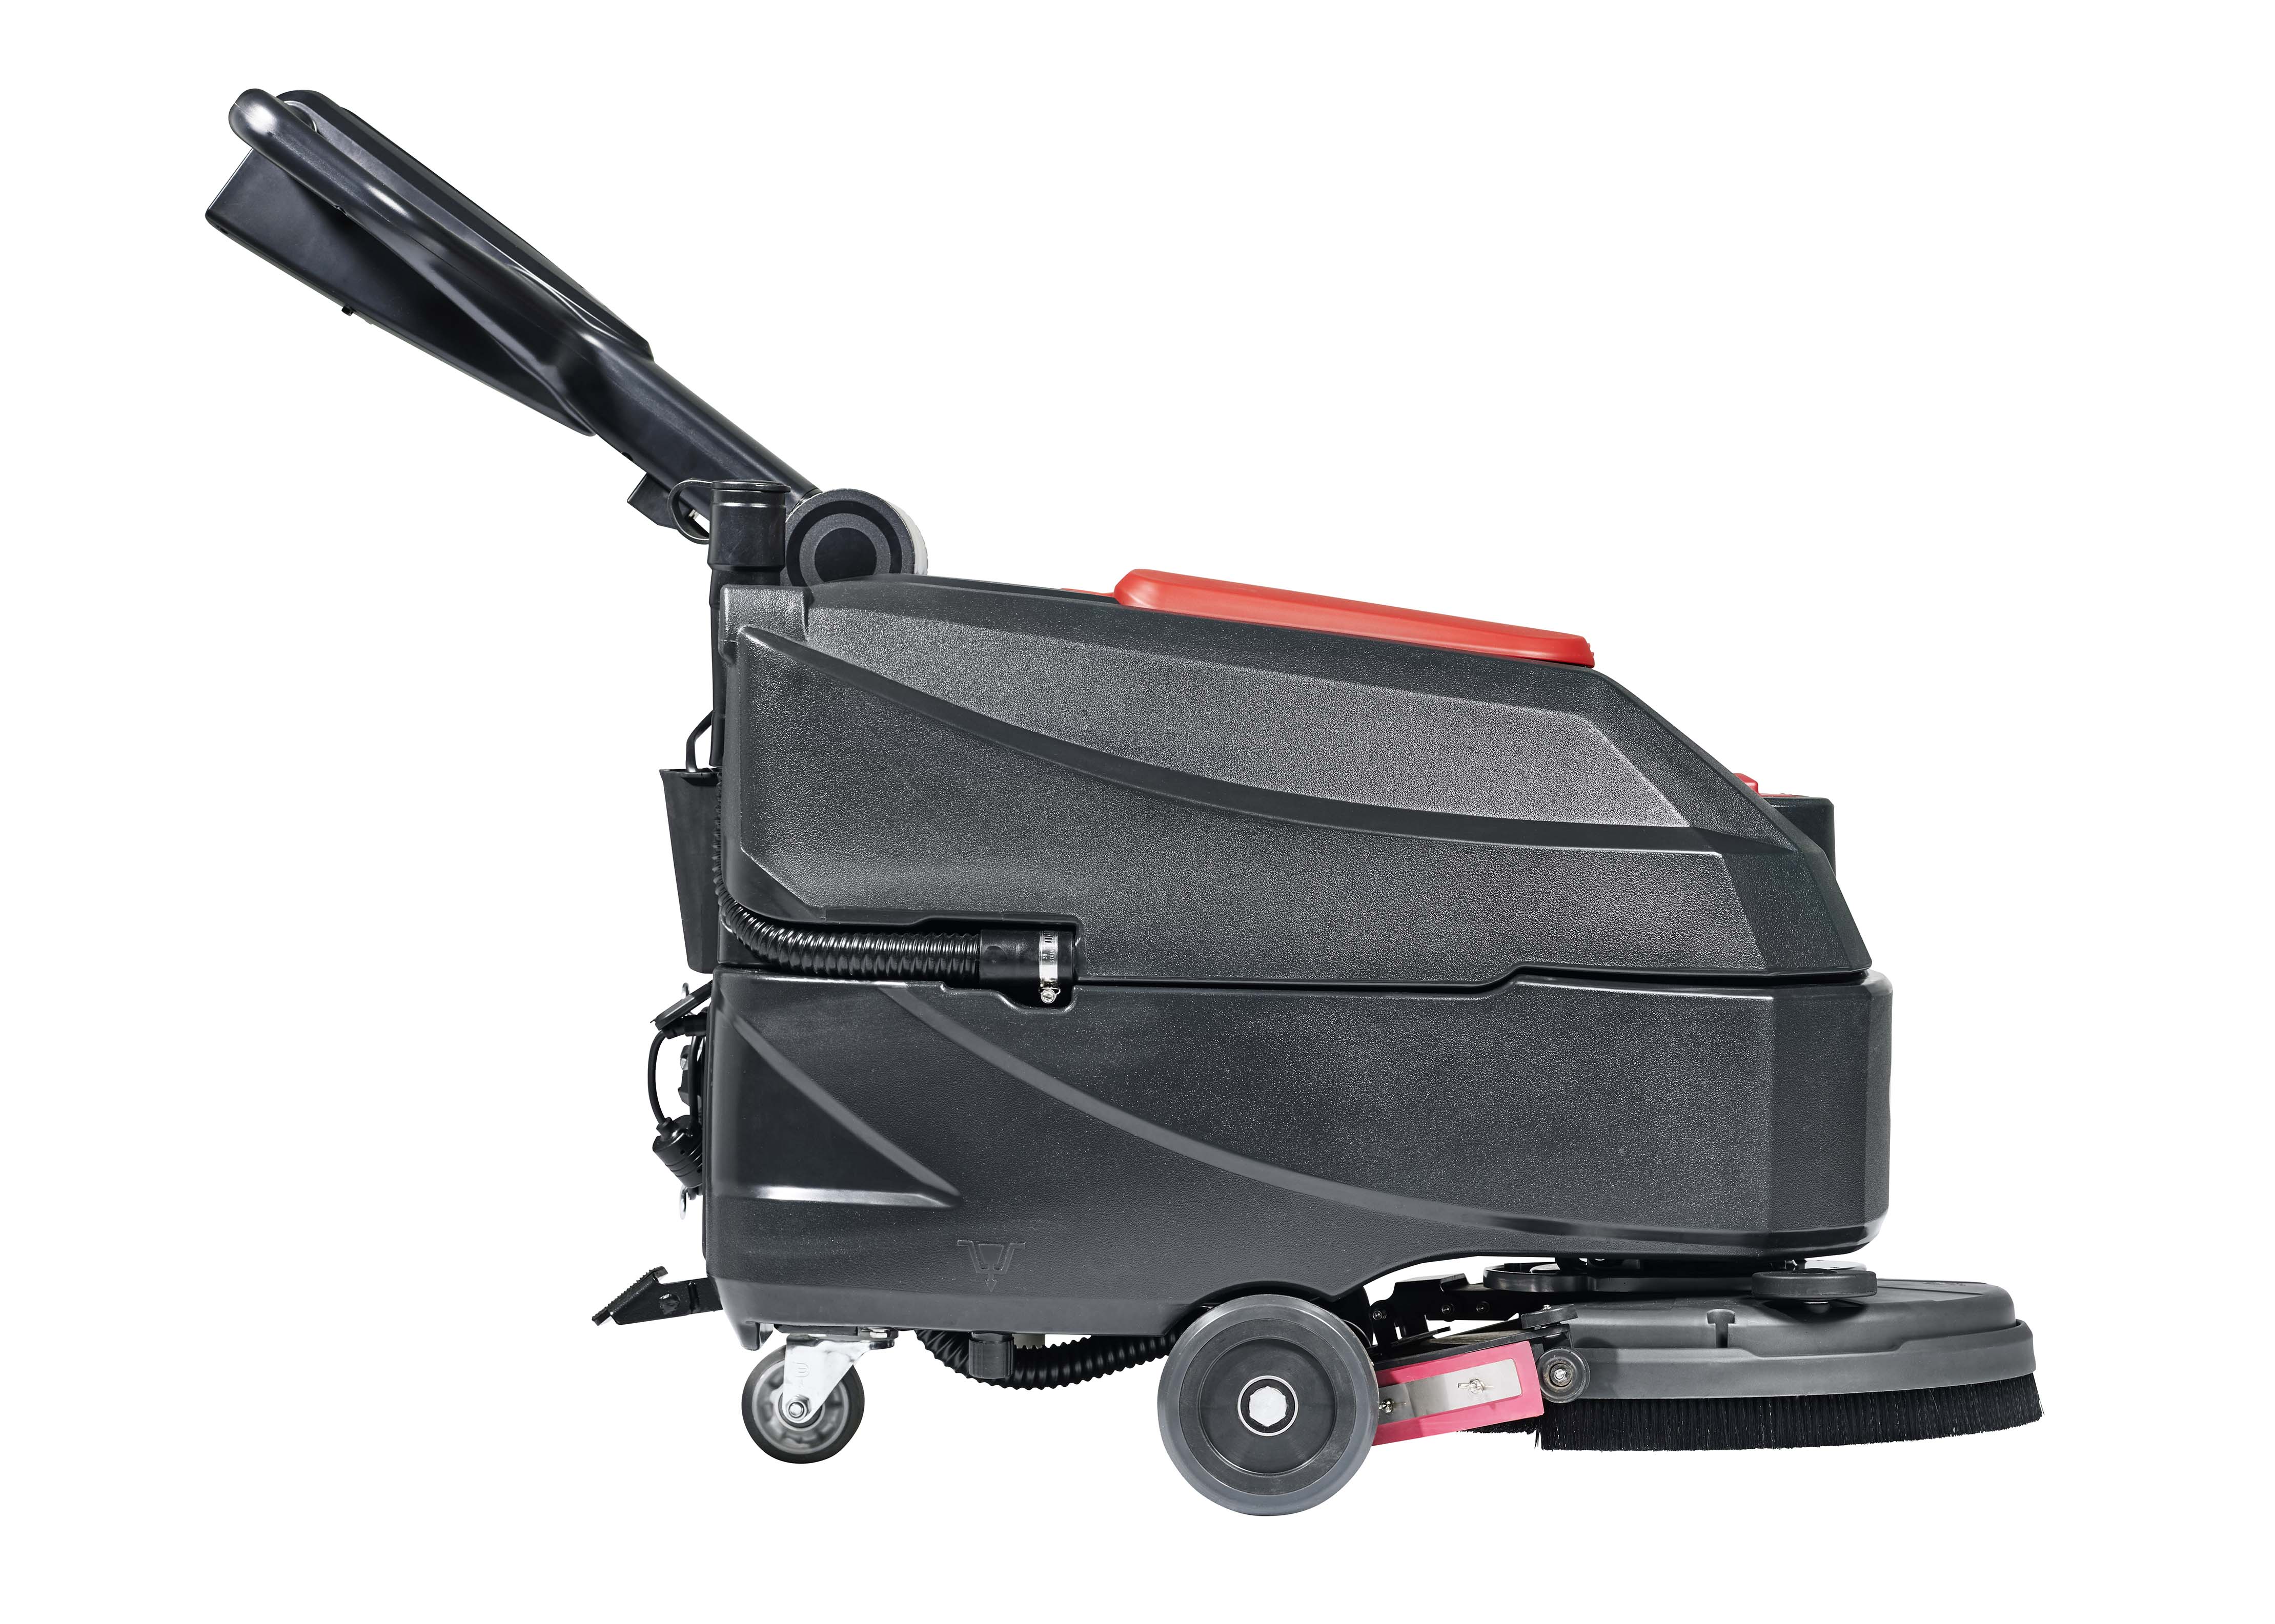 Viper AS4325B 17 AGM Cordless Walk Behind Disc Floor Scrubber - 6.6 Gallon  - Buy Janitorial Direct